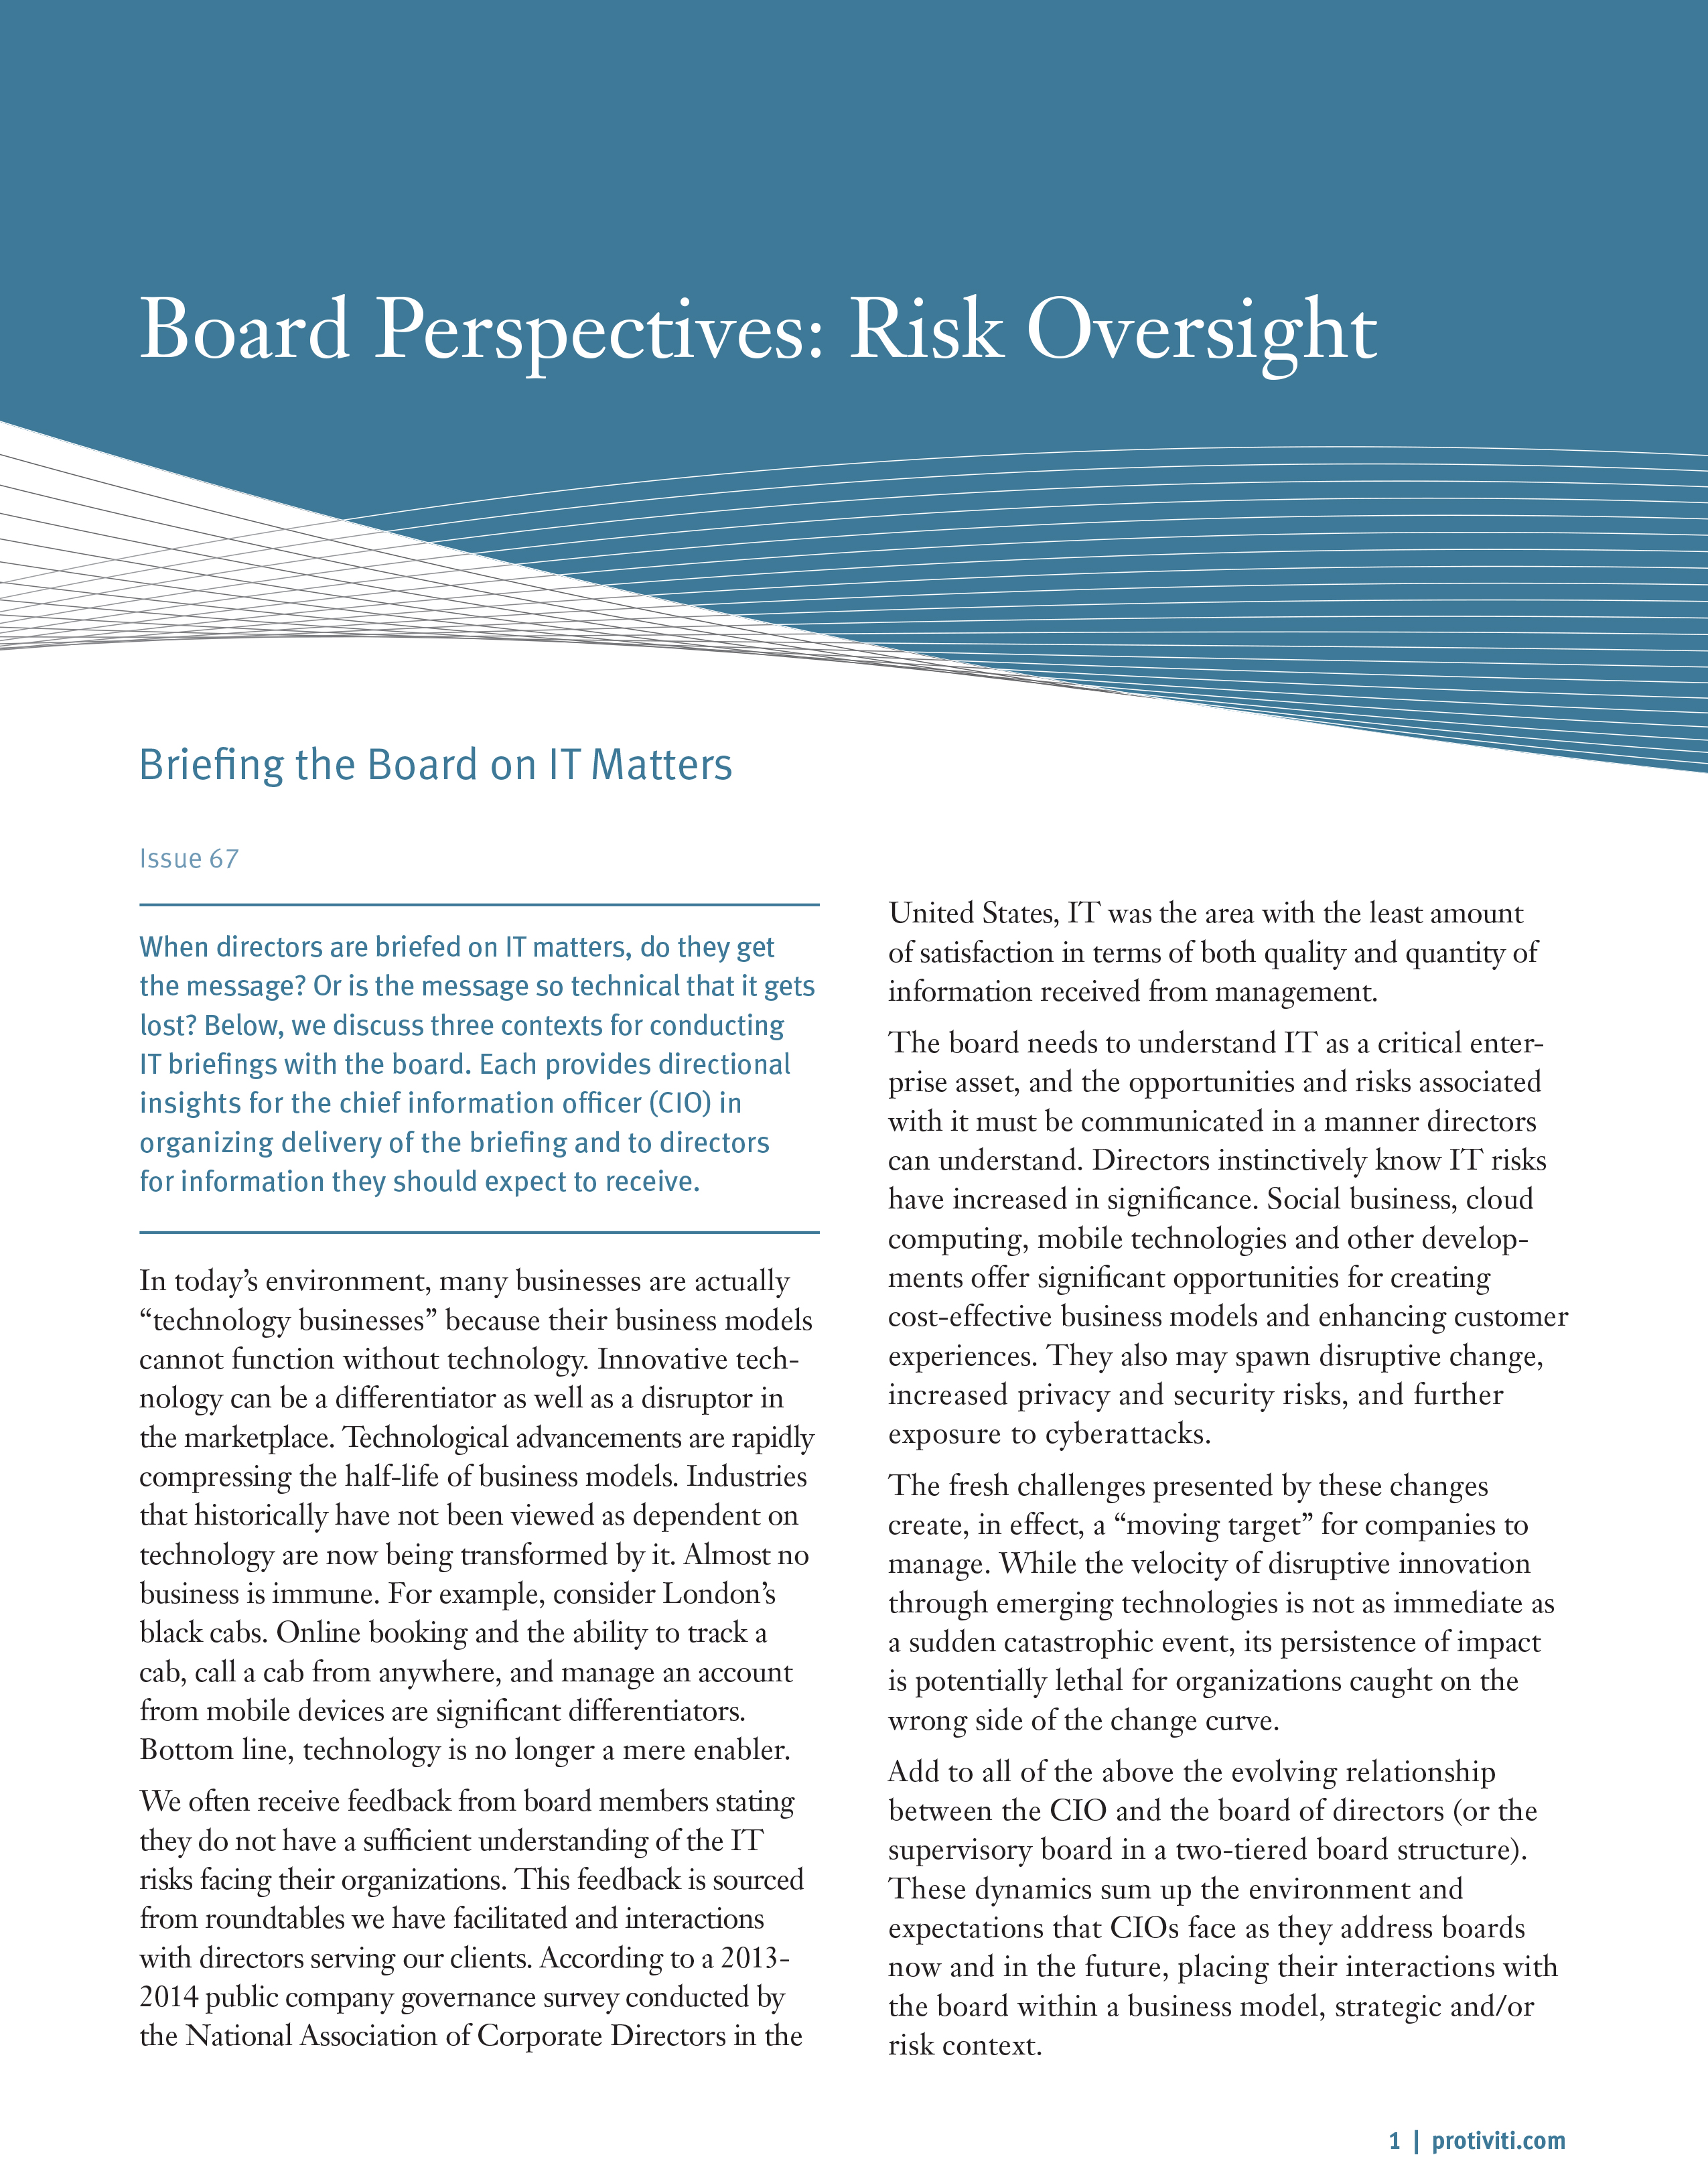 Screenshot of the first page of Briefing the Board on IT Matters